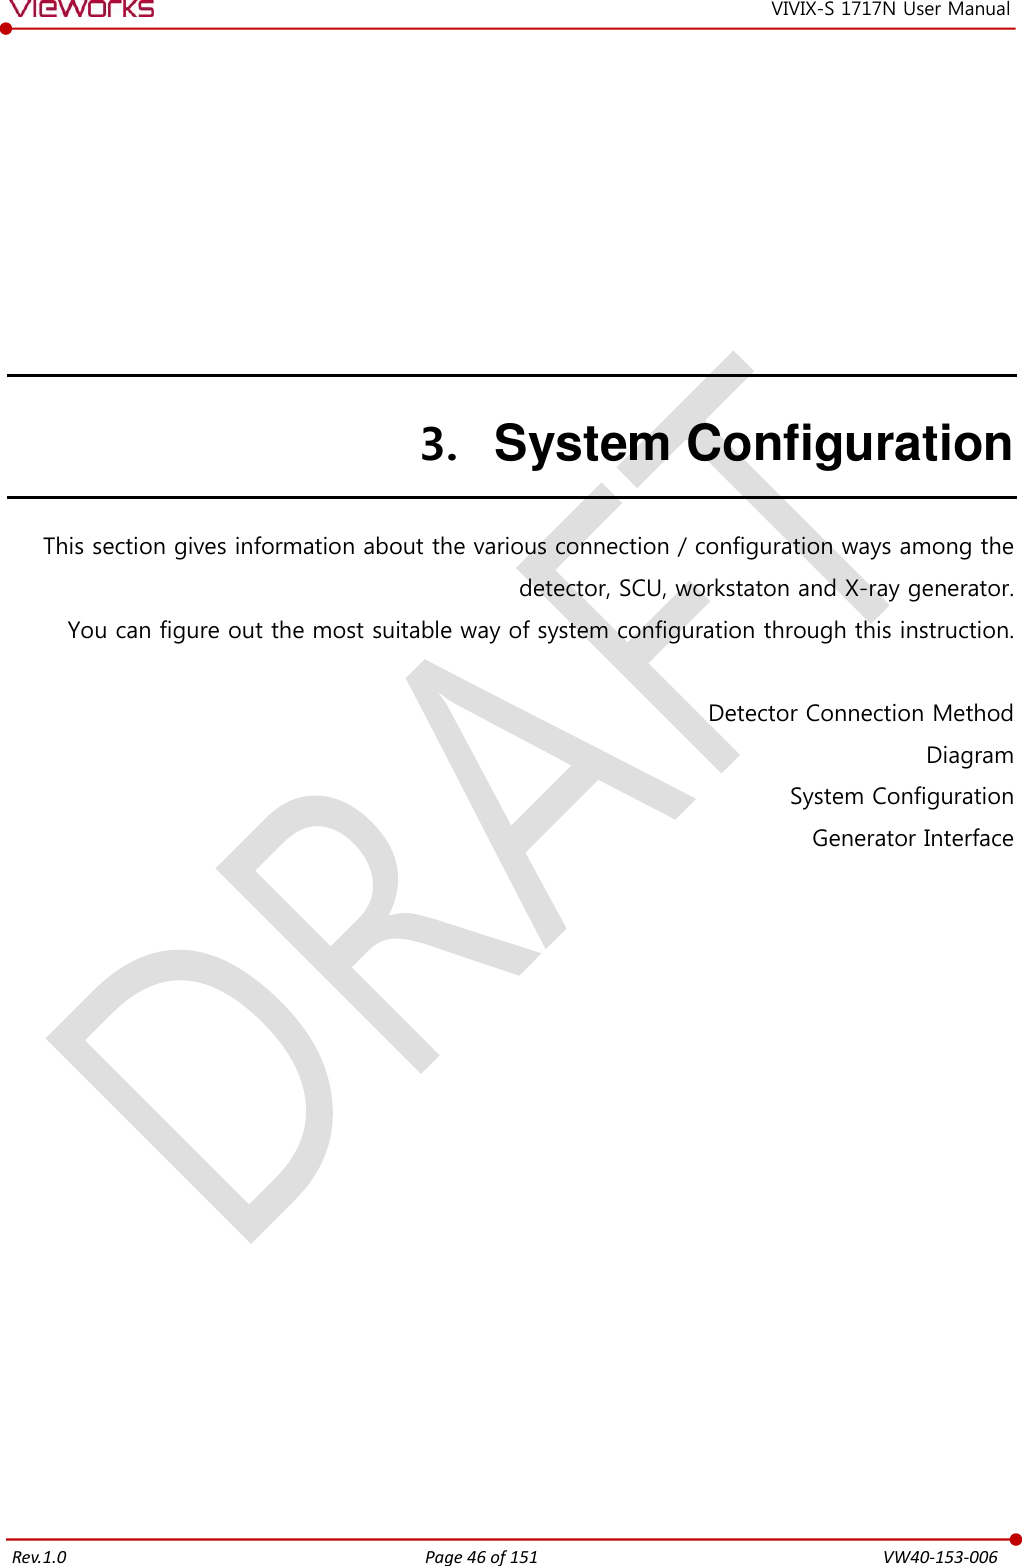   Rev.1.0 Page 46 of 151  VW40-153-006 VIVIX-S 1717N User Manual 3. System Configuration This section gives information about the various connection / configuration ways among the detector, SCU, workstaton and X-ray generator. You can figure out the most suitable way of system configuration through this instruction.  Detector Connection Method Diagram System Configuration Generator Interface             